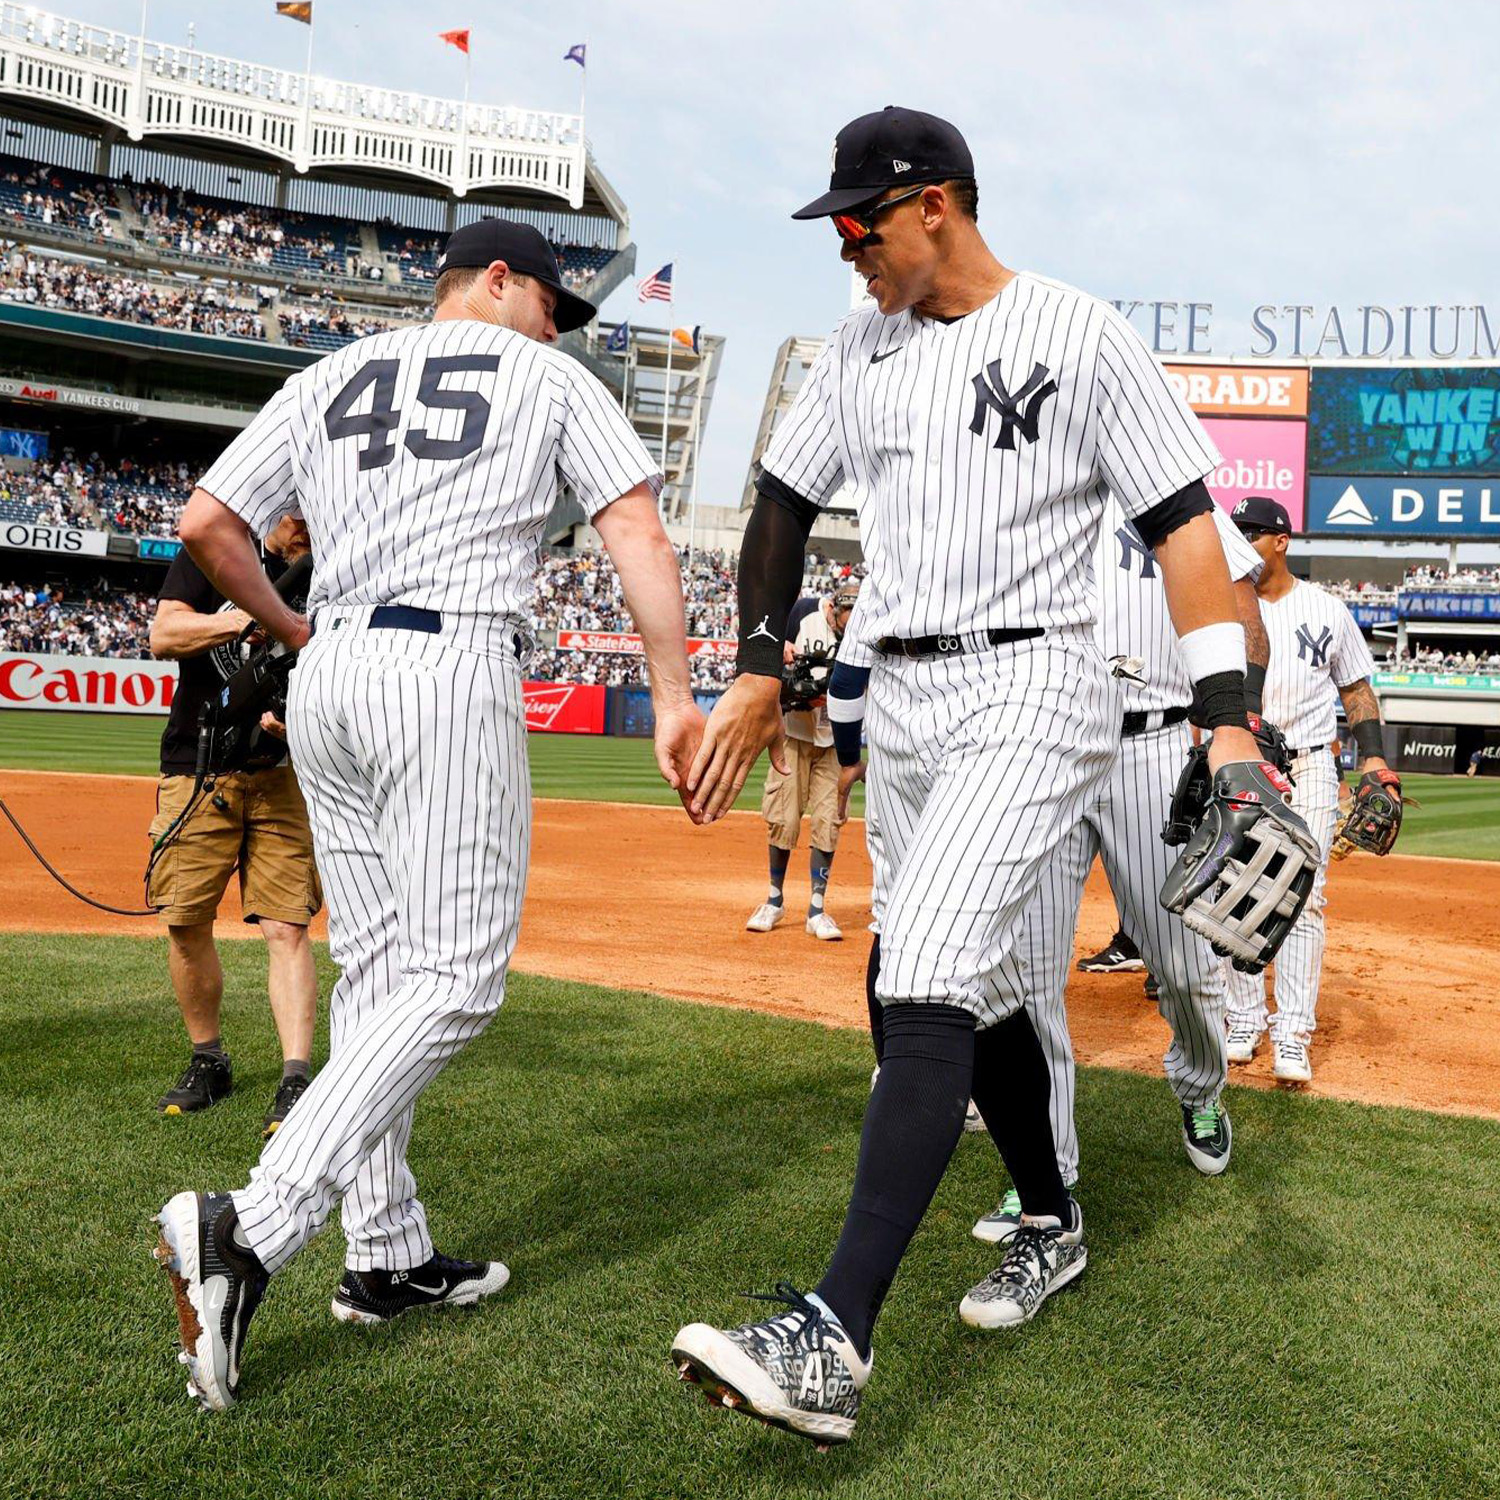 Yankees and Tigers will play in the Little League Classic on Aug